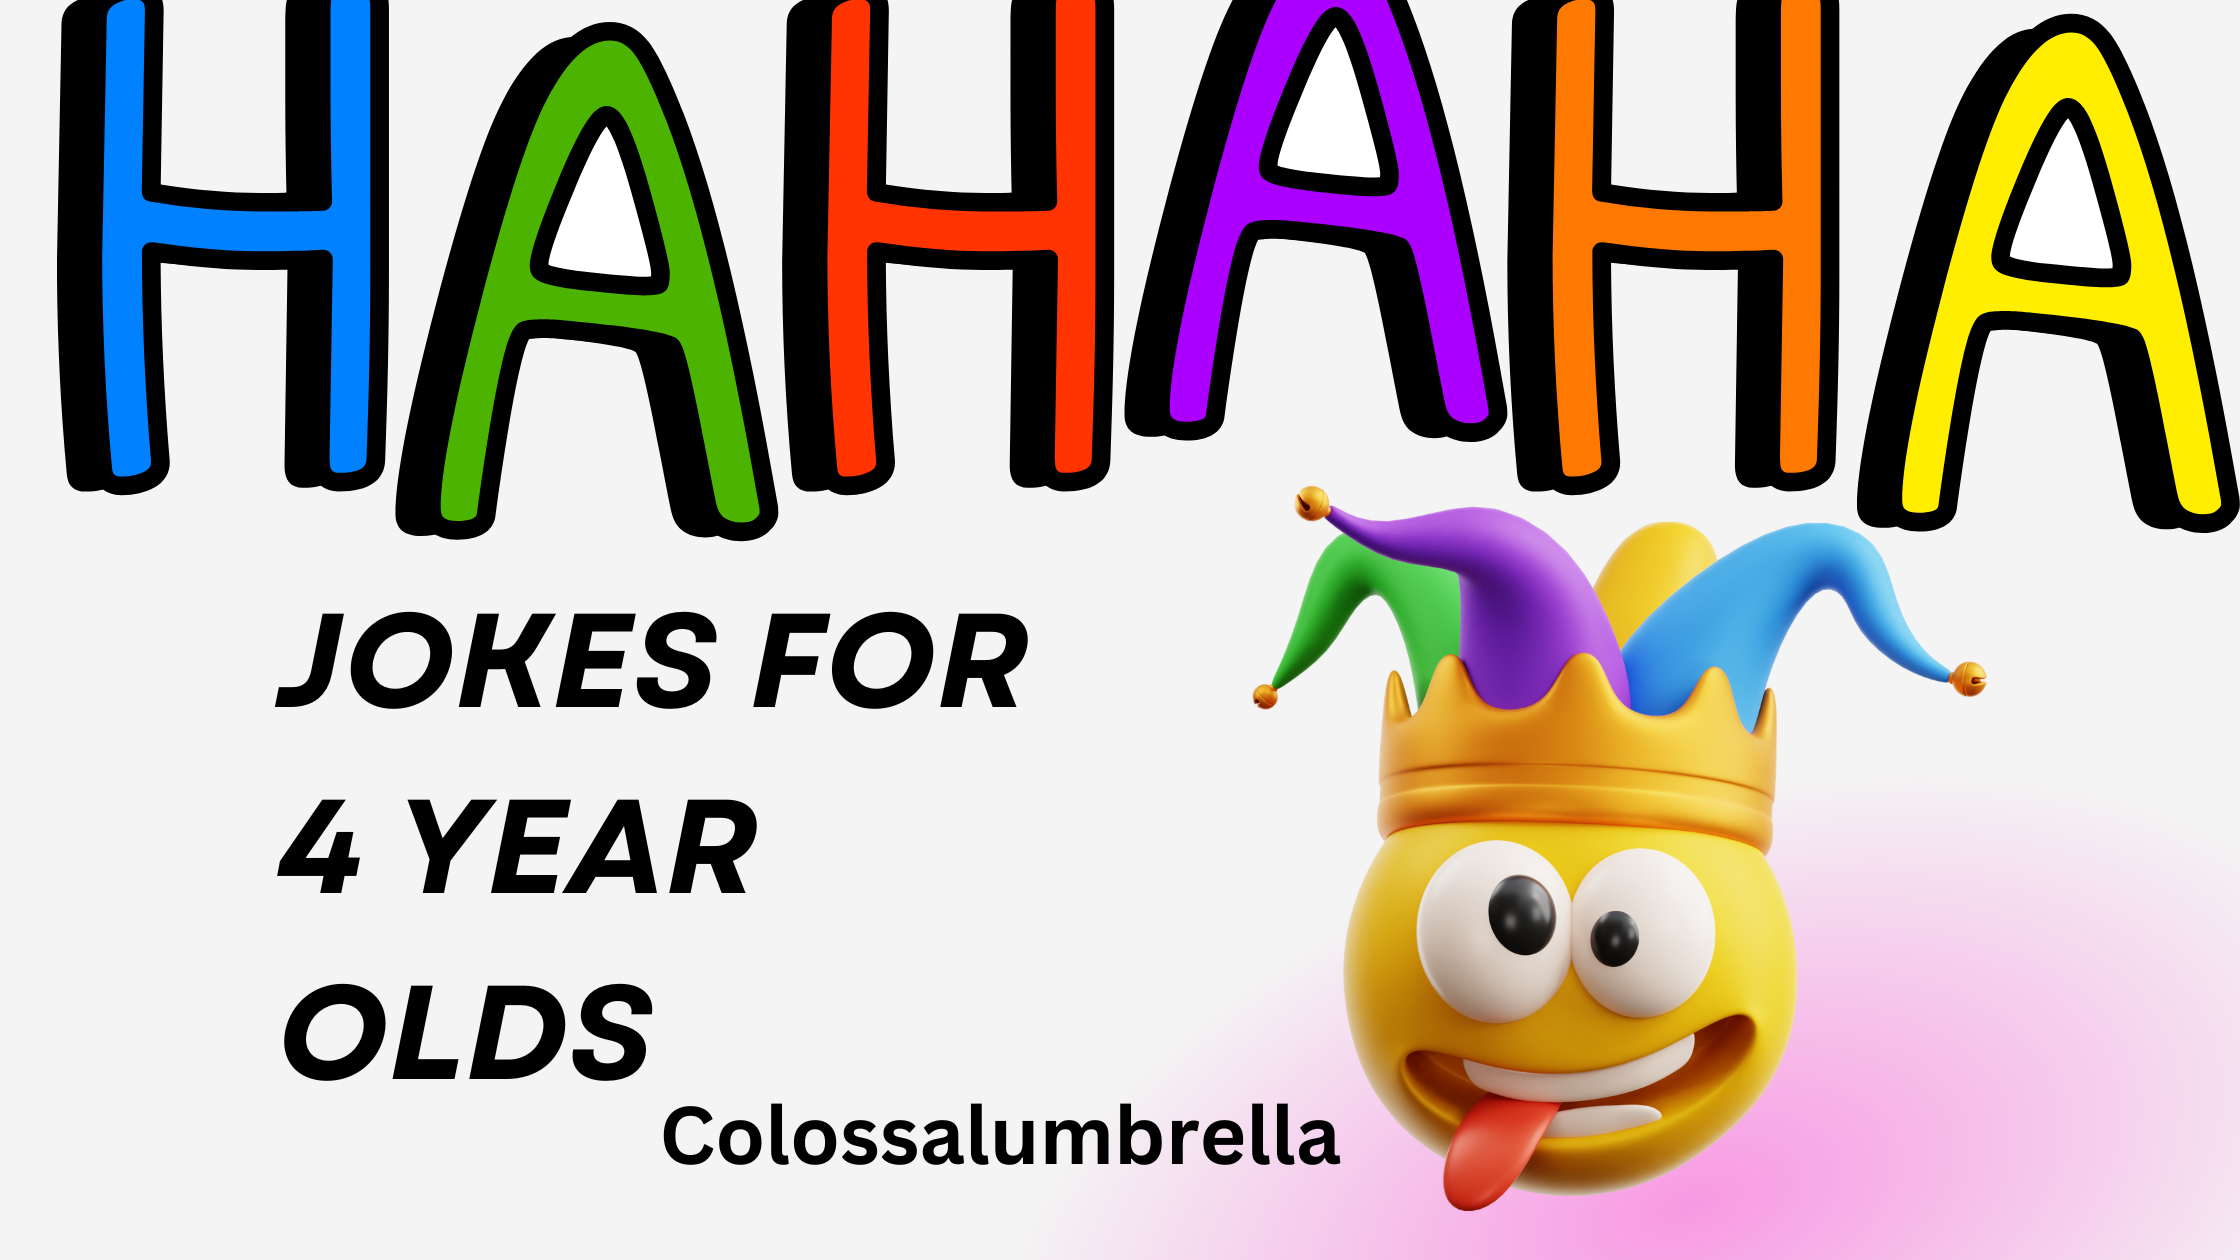 50+ Jokes for 4 year olds by Colossalumbrella